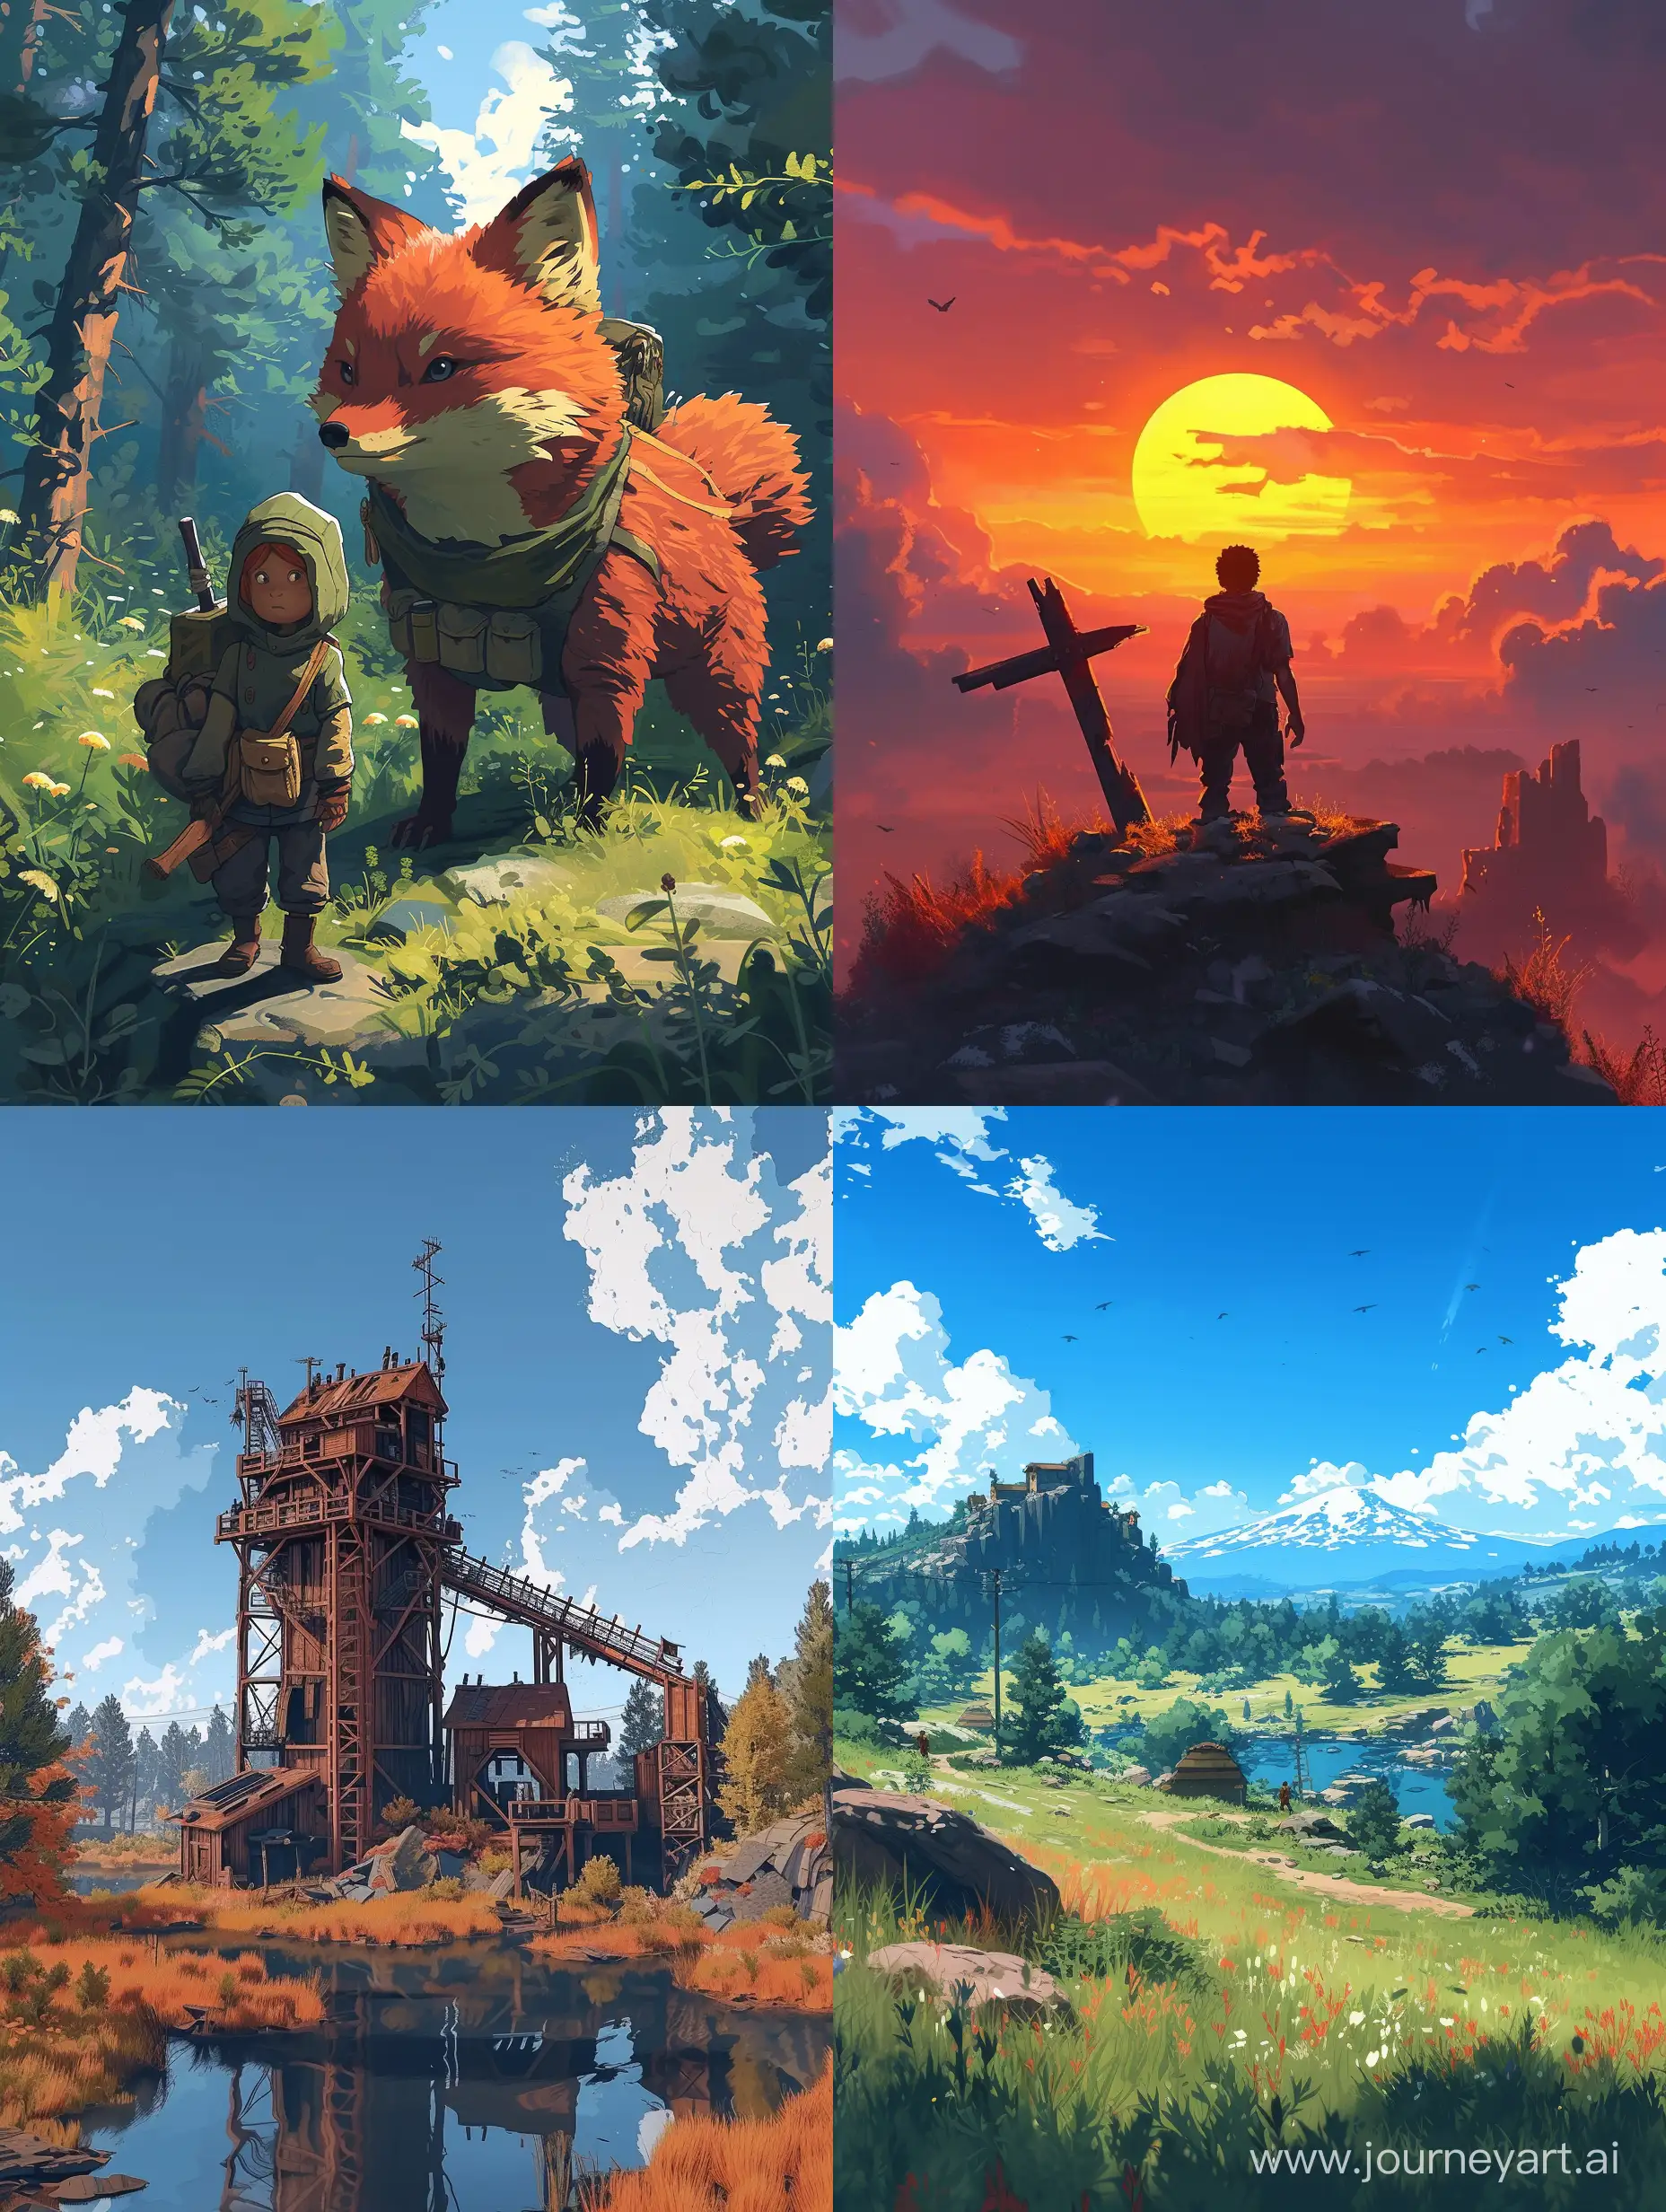 A picture of Rust videogame inspired by Studio Ghibli Art Style